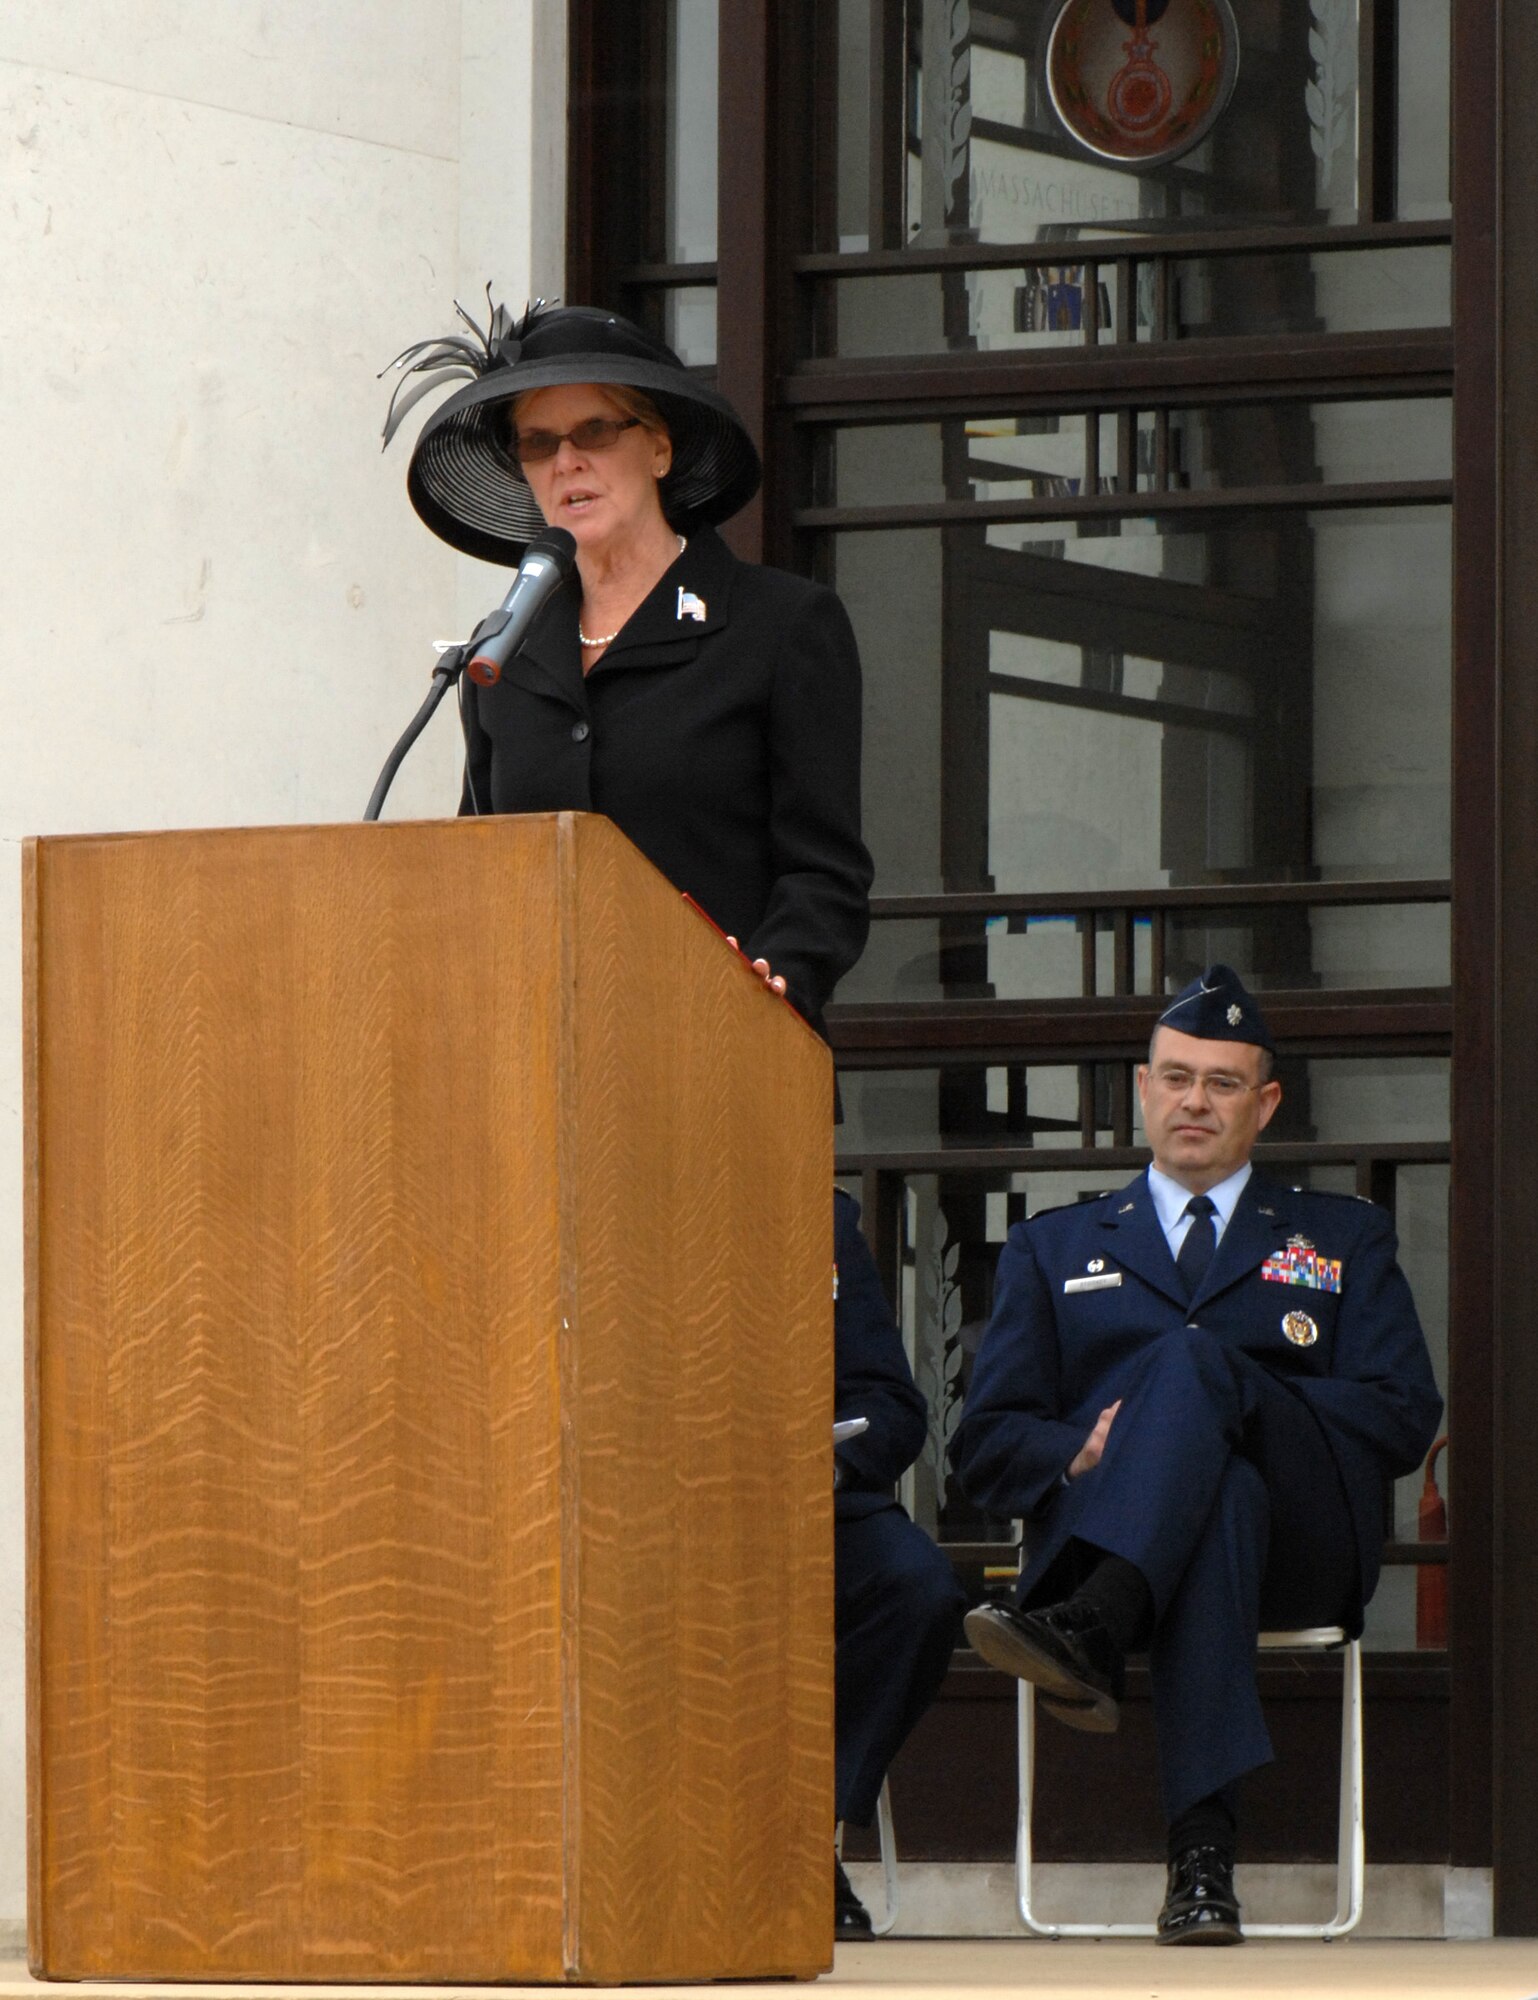 Jonna Doolittle-Hoppes, granddaughter of Gen. James H. "Jimmy" Doolittle, speaks of the courage and humility of the soldiers she has met as a writer during the Memorial Day ceremony at Madingley Memorial Cemetery, May 25, 2009.  Ms. Doolittle-Hoppes said "I know her grandfather would be proud of the men and woman fighting today."  (U.S. Air Force photo by Senior Airman Christopher L. Ingersoll)